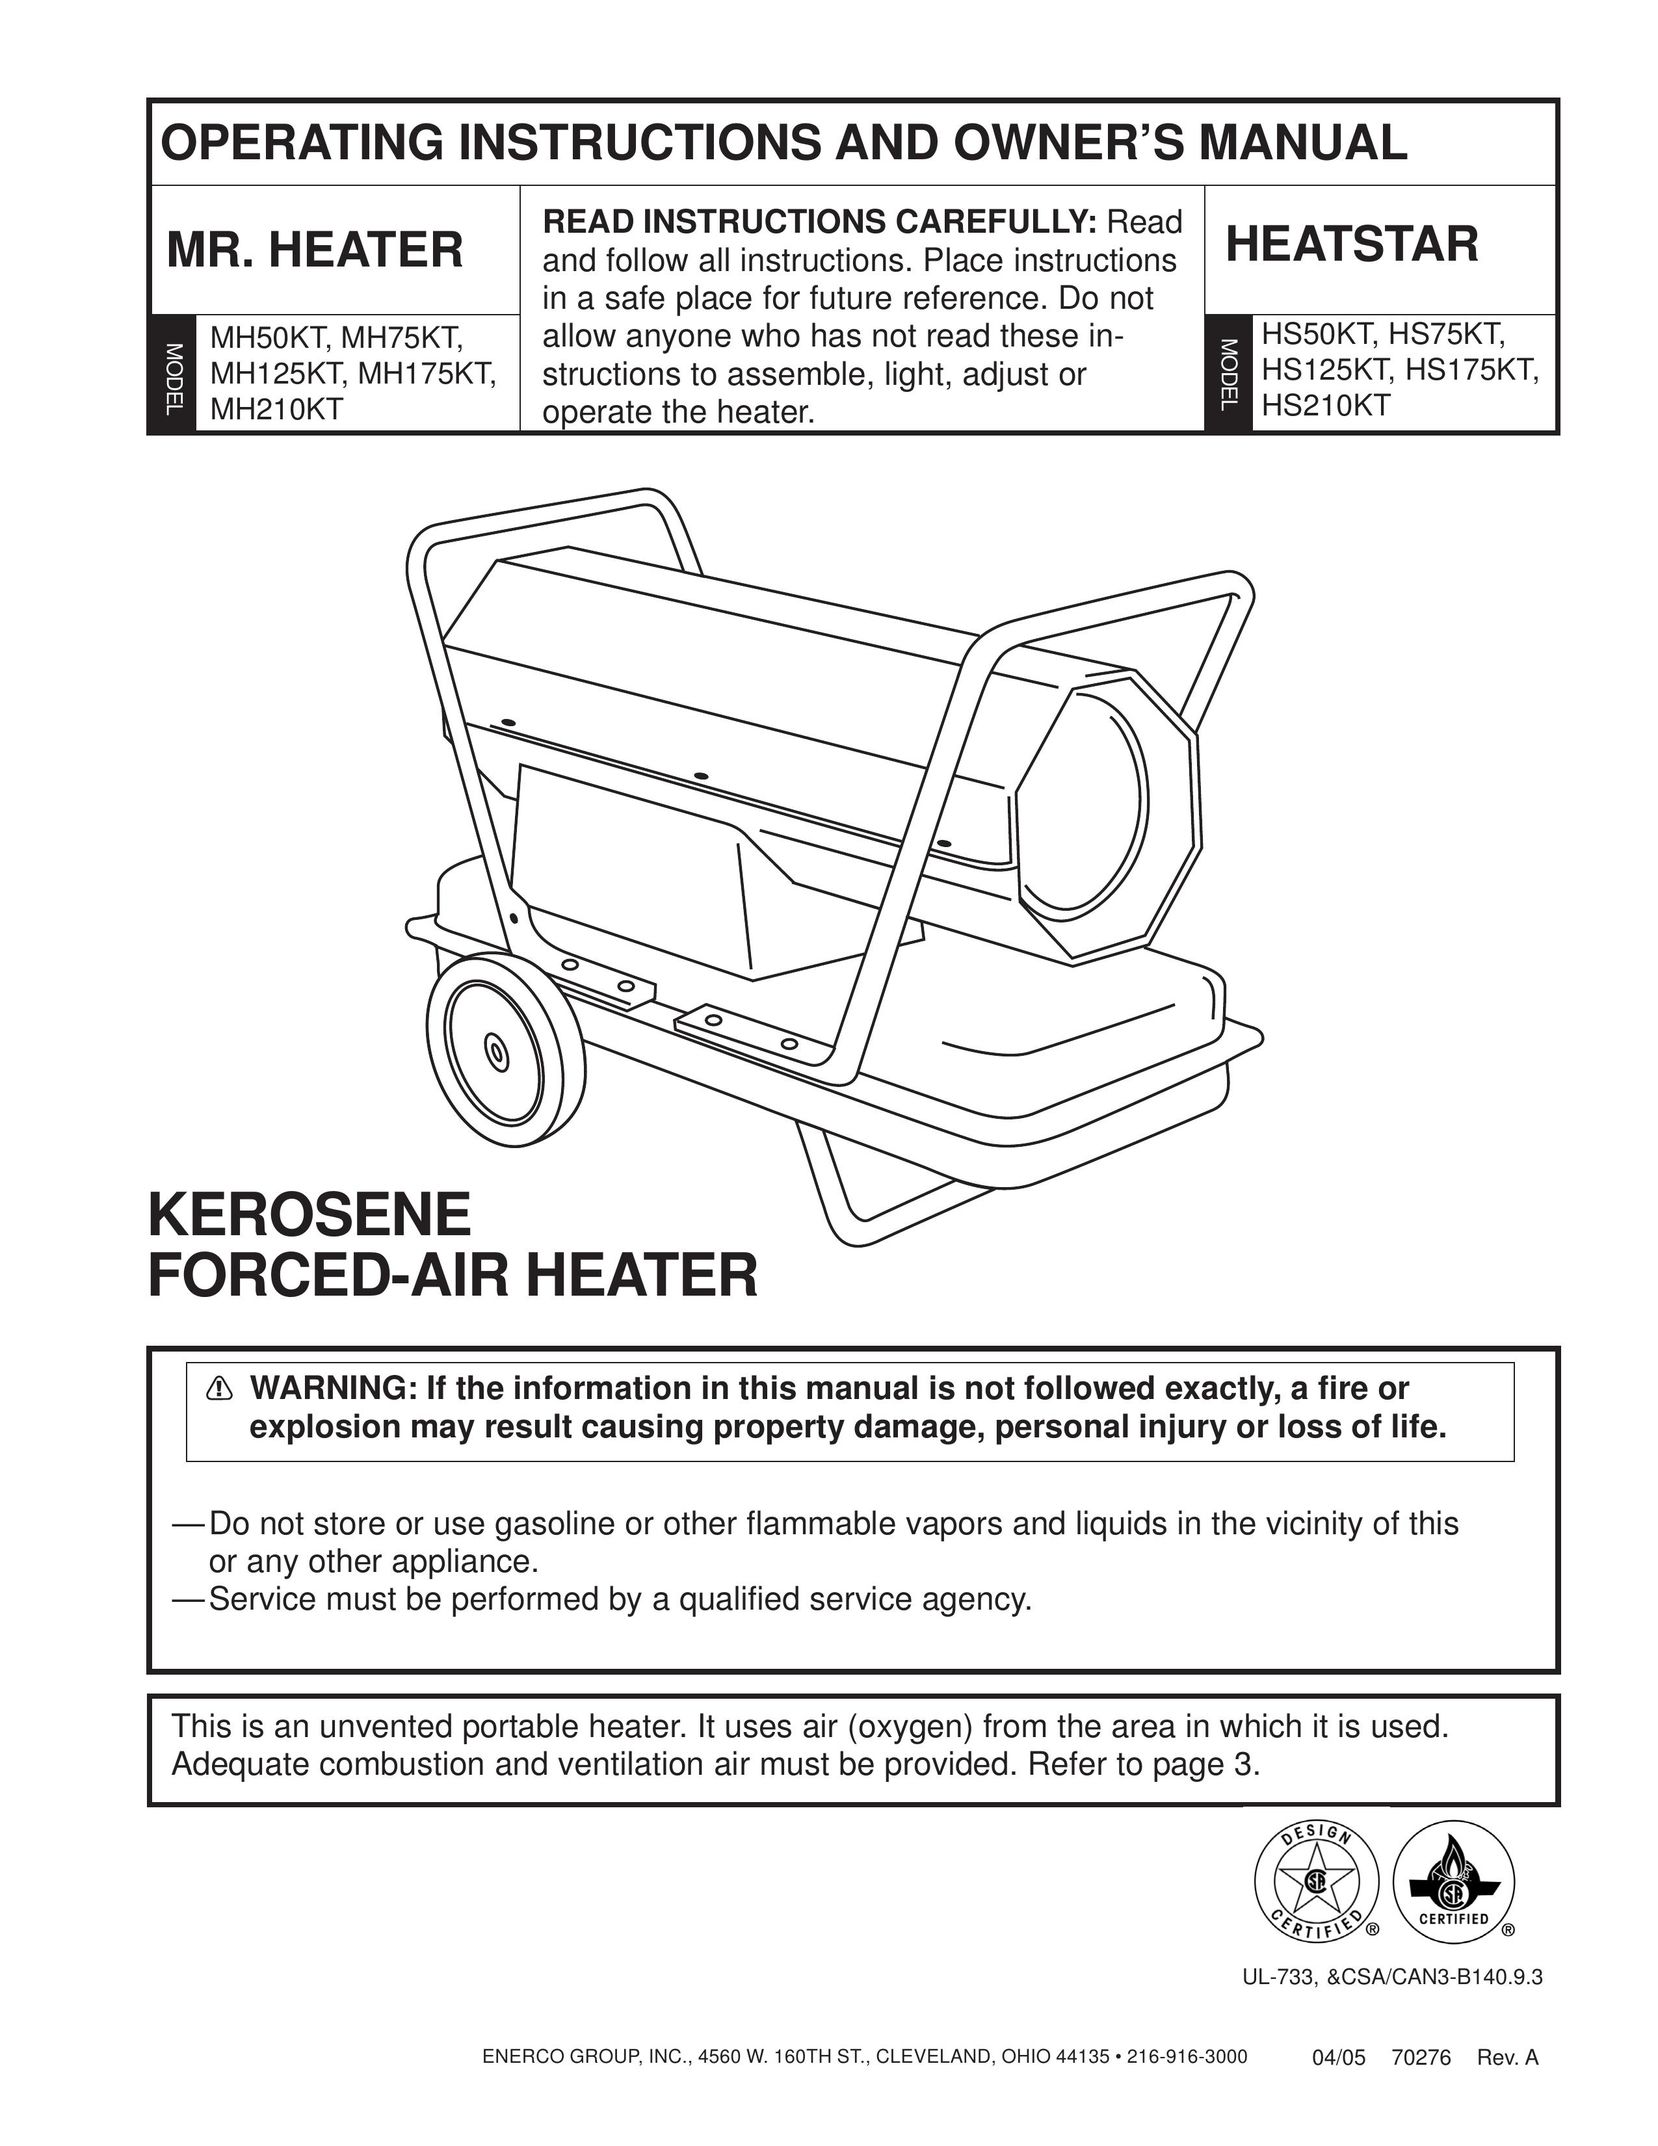 Enerco MH50KT Gas Heater User Manual